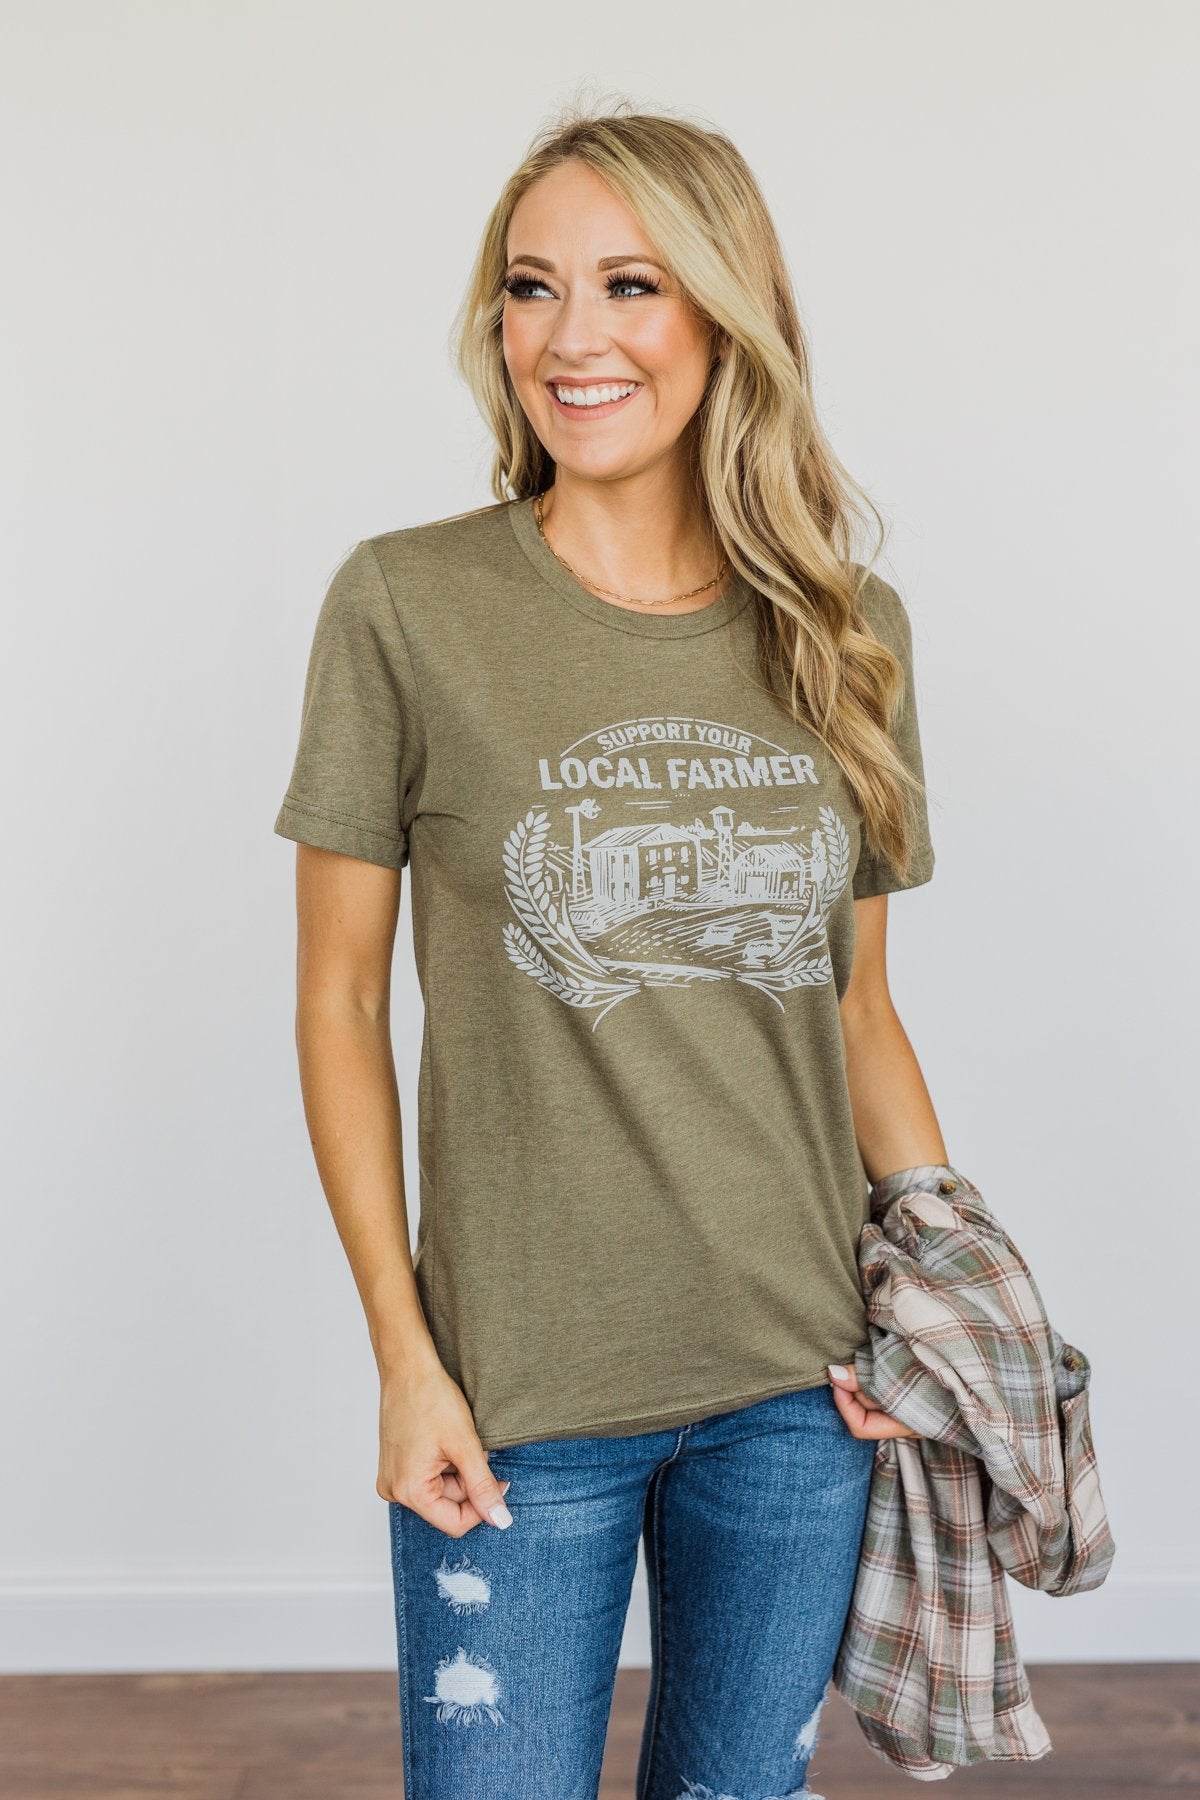 "Support Your Local Farmer" Graphic Tee- Olive